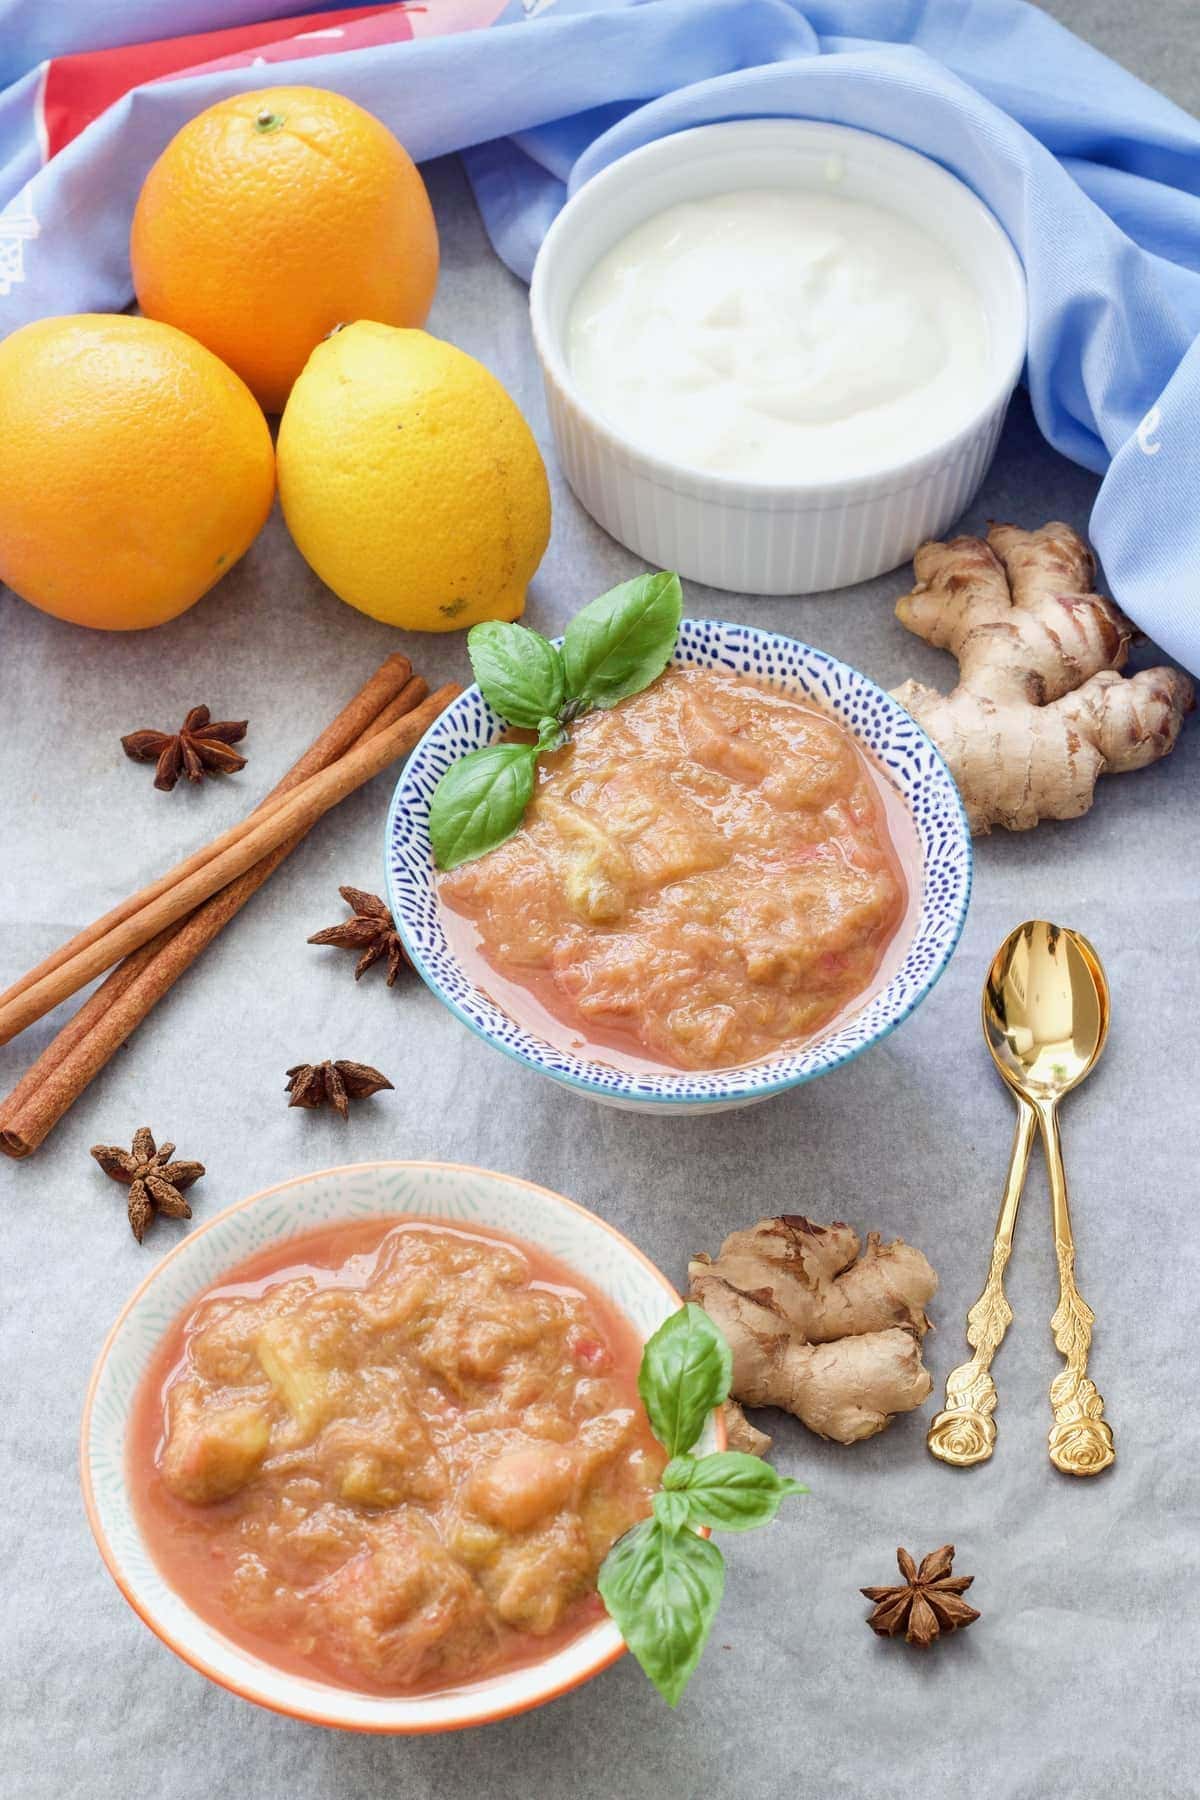 Stewed rhubarb in bowls with fruit, yogurt & ginger roots around it.